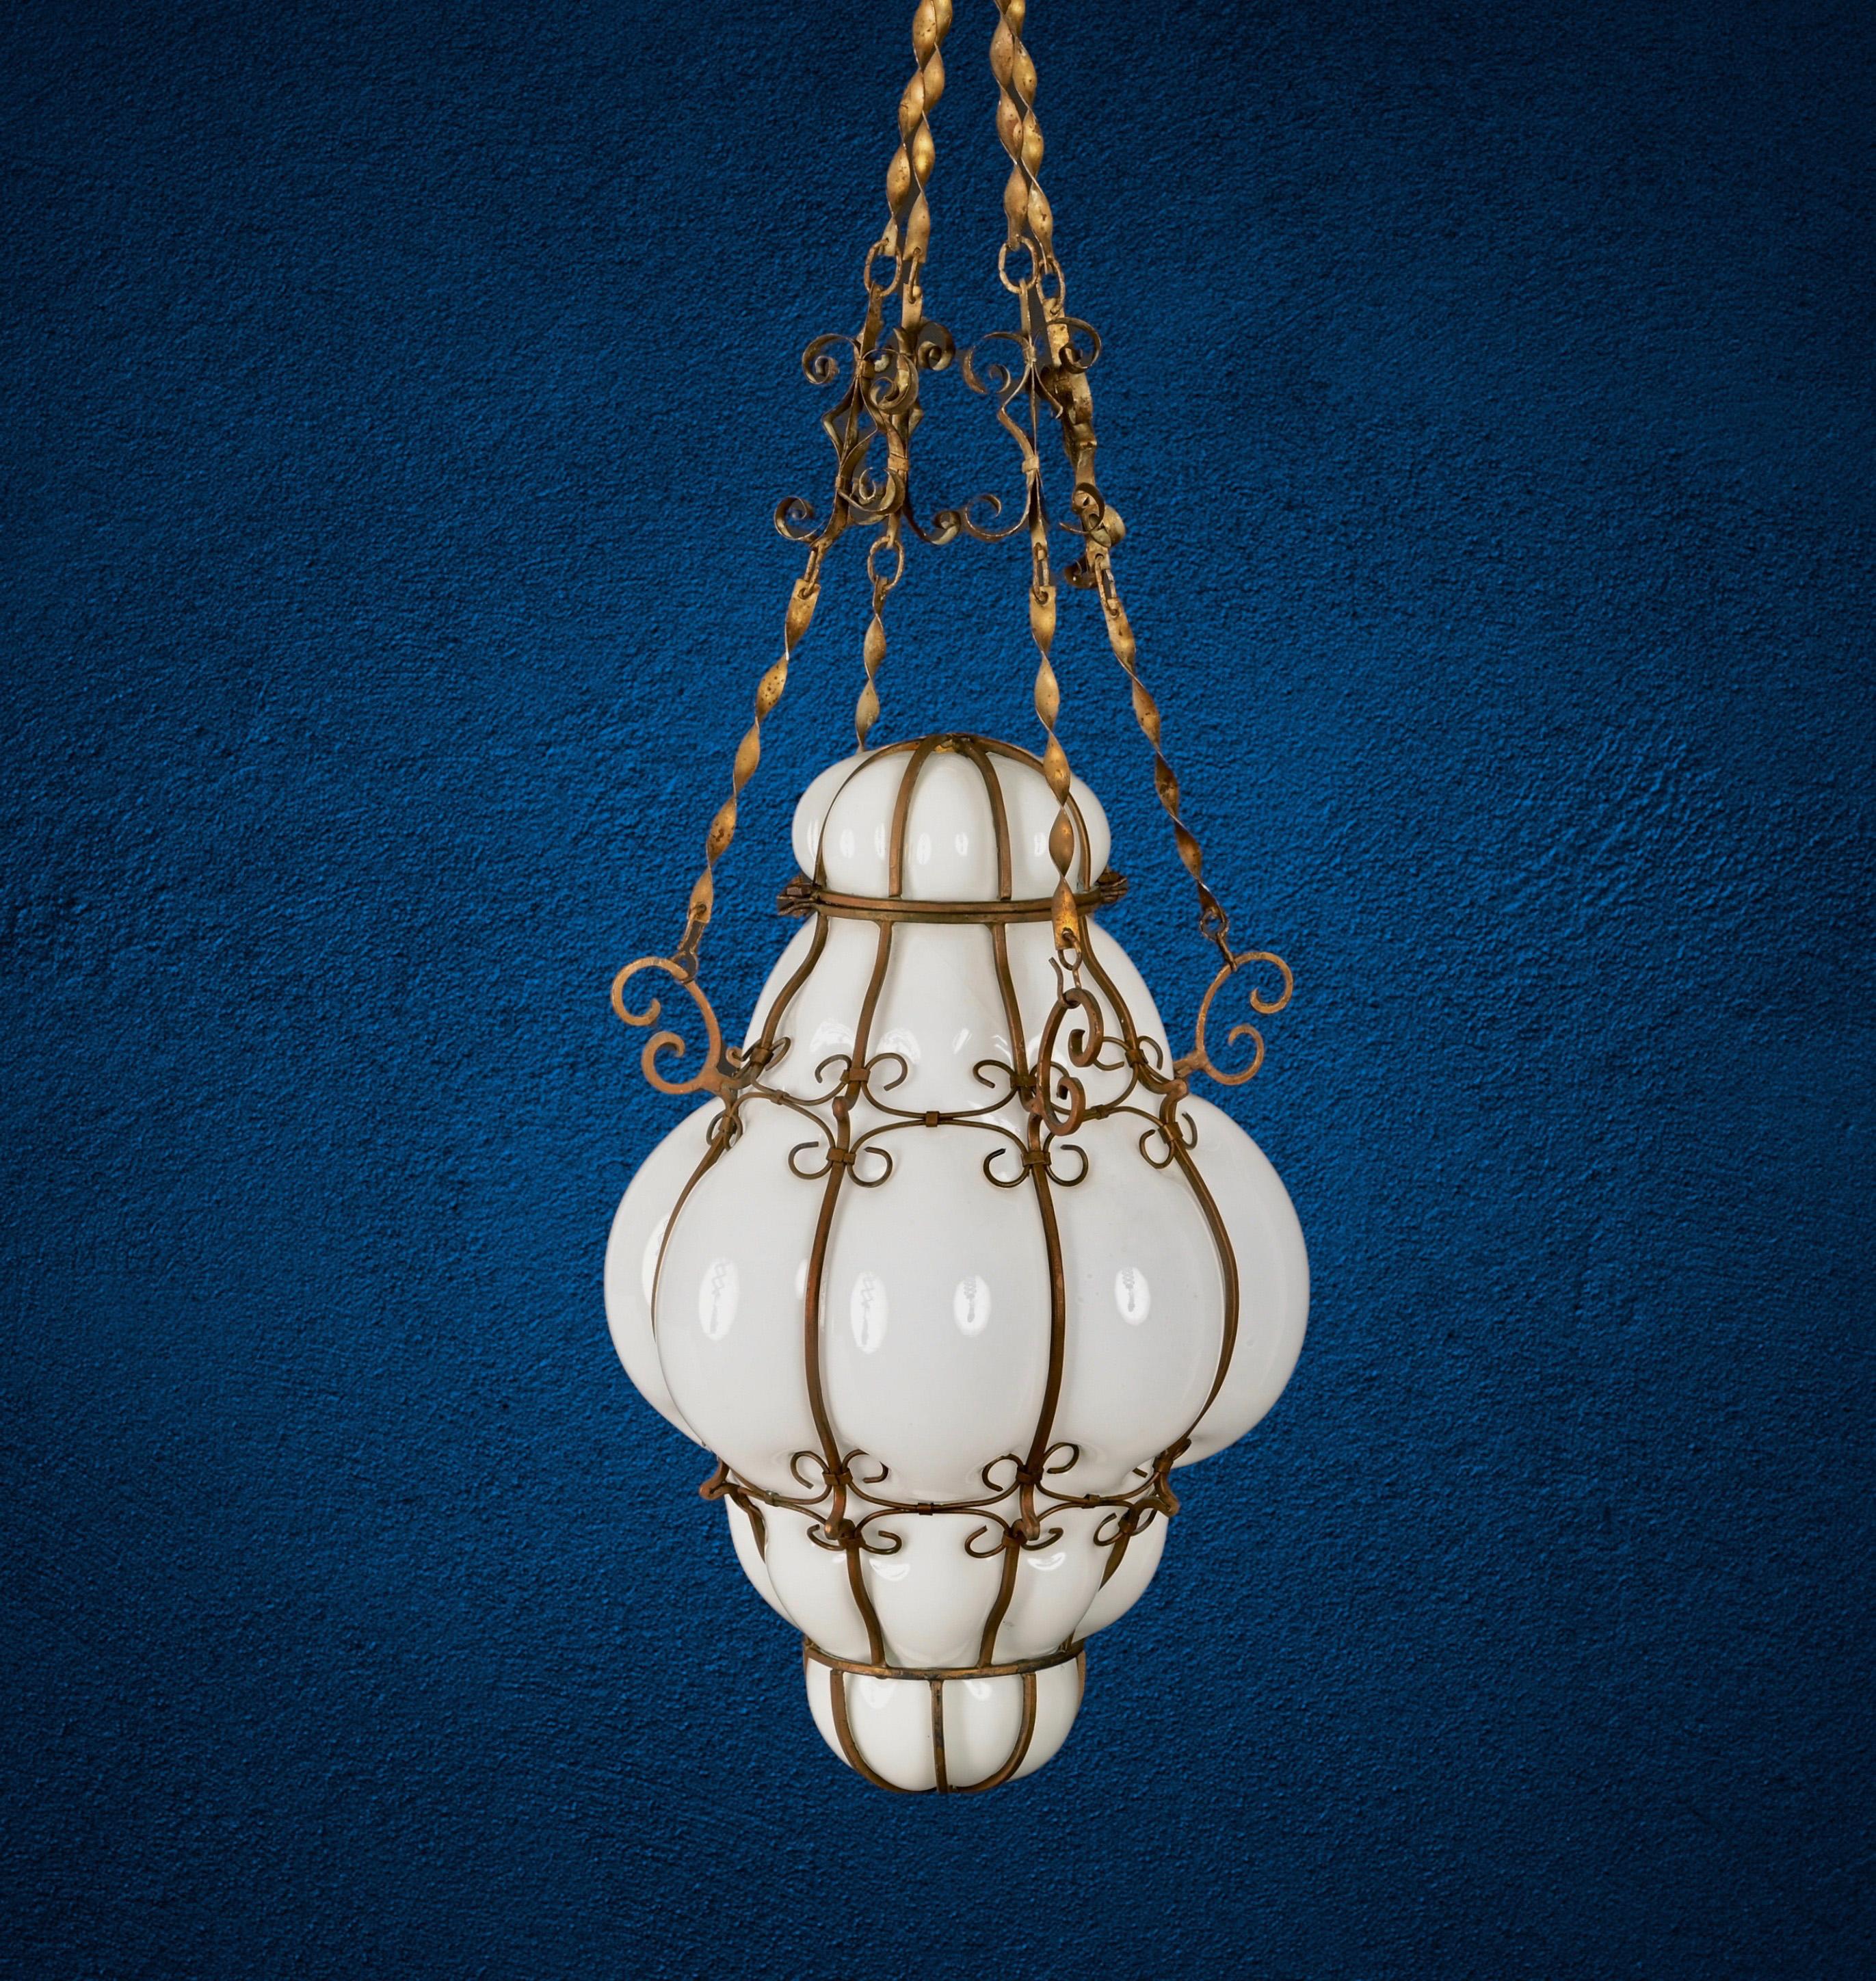 Midcentury Venetian Brass and Mouth Blown Murano White Glass Chandelier, 1940s For Sale 4